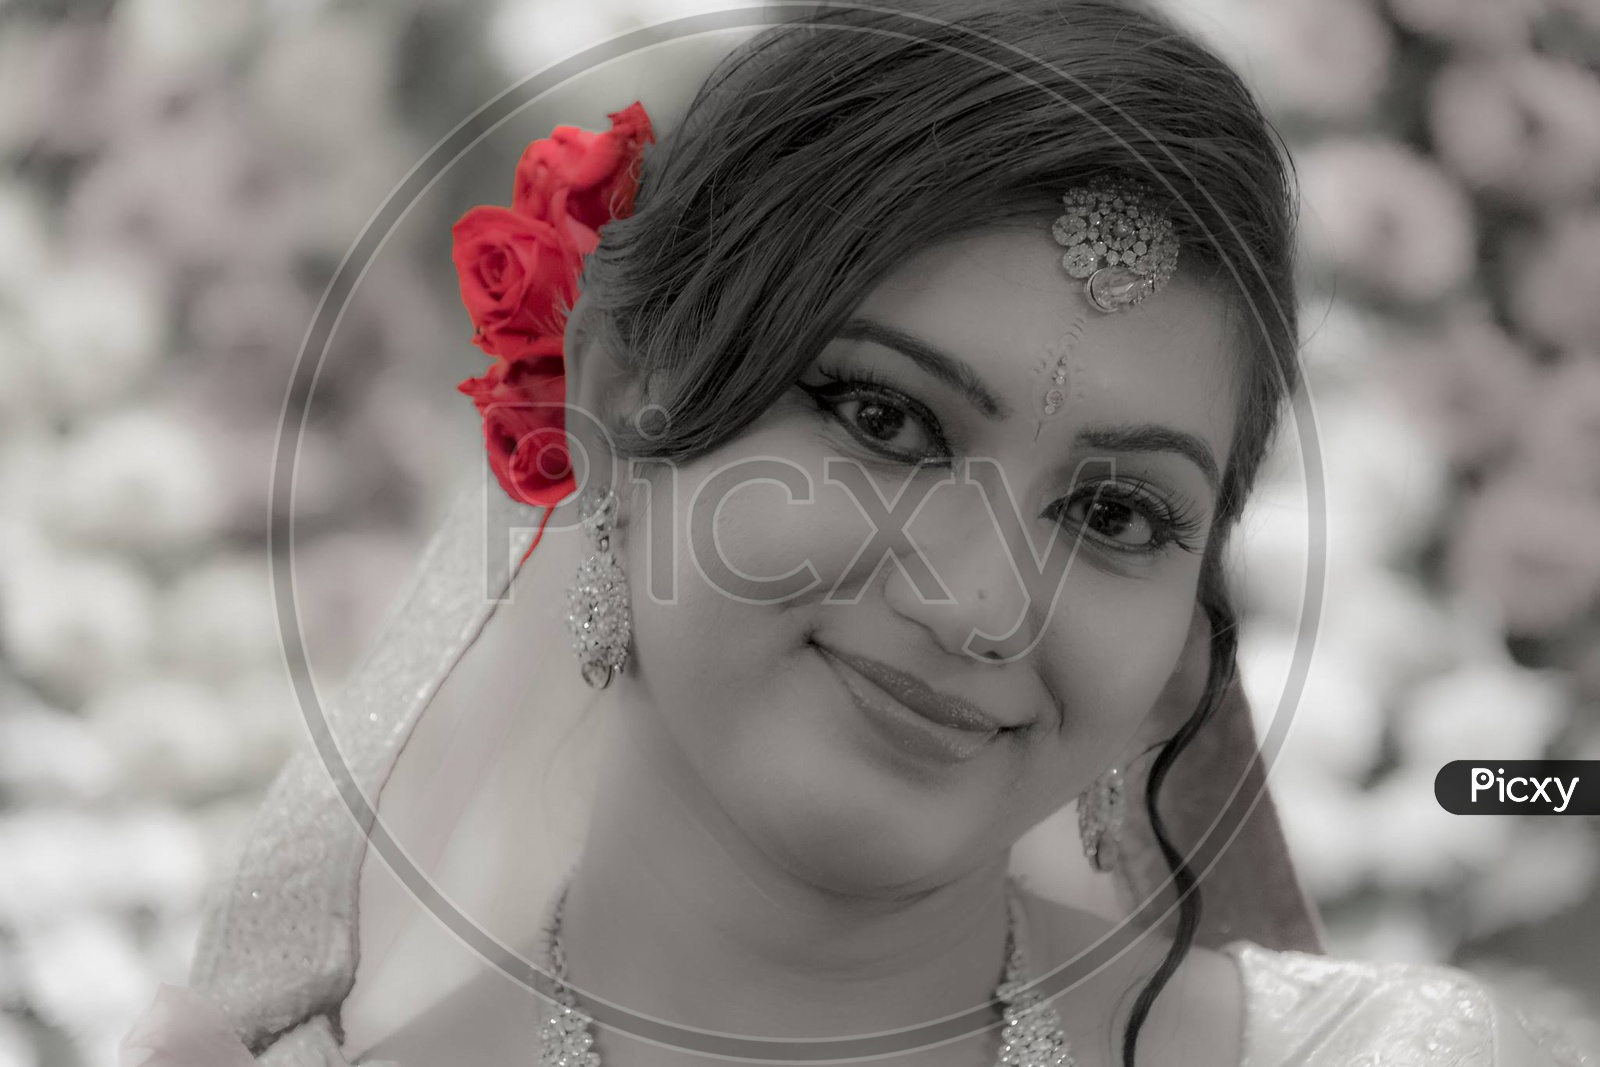 A Beautiful Young Indian Bride In Bridal Makeup With Eyes At The Camera In Black And White With Selective Red Colored Rose